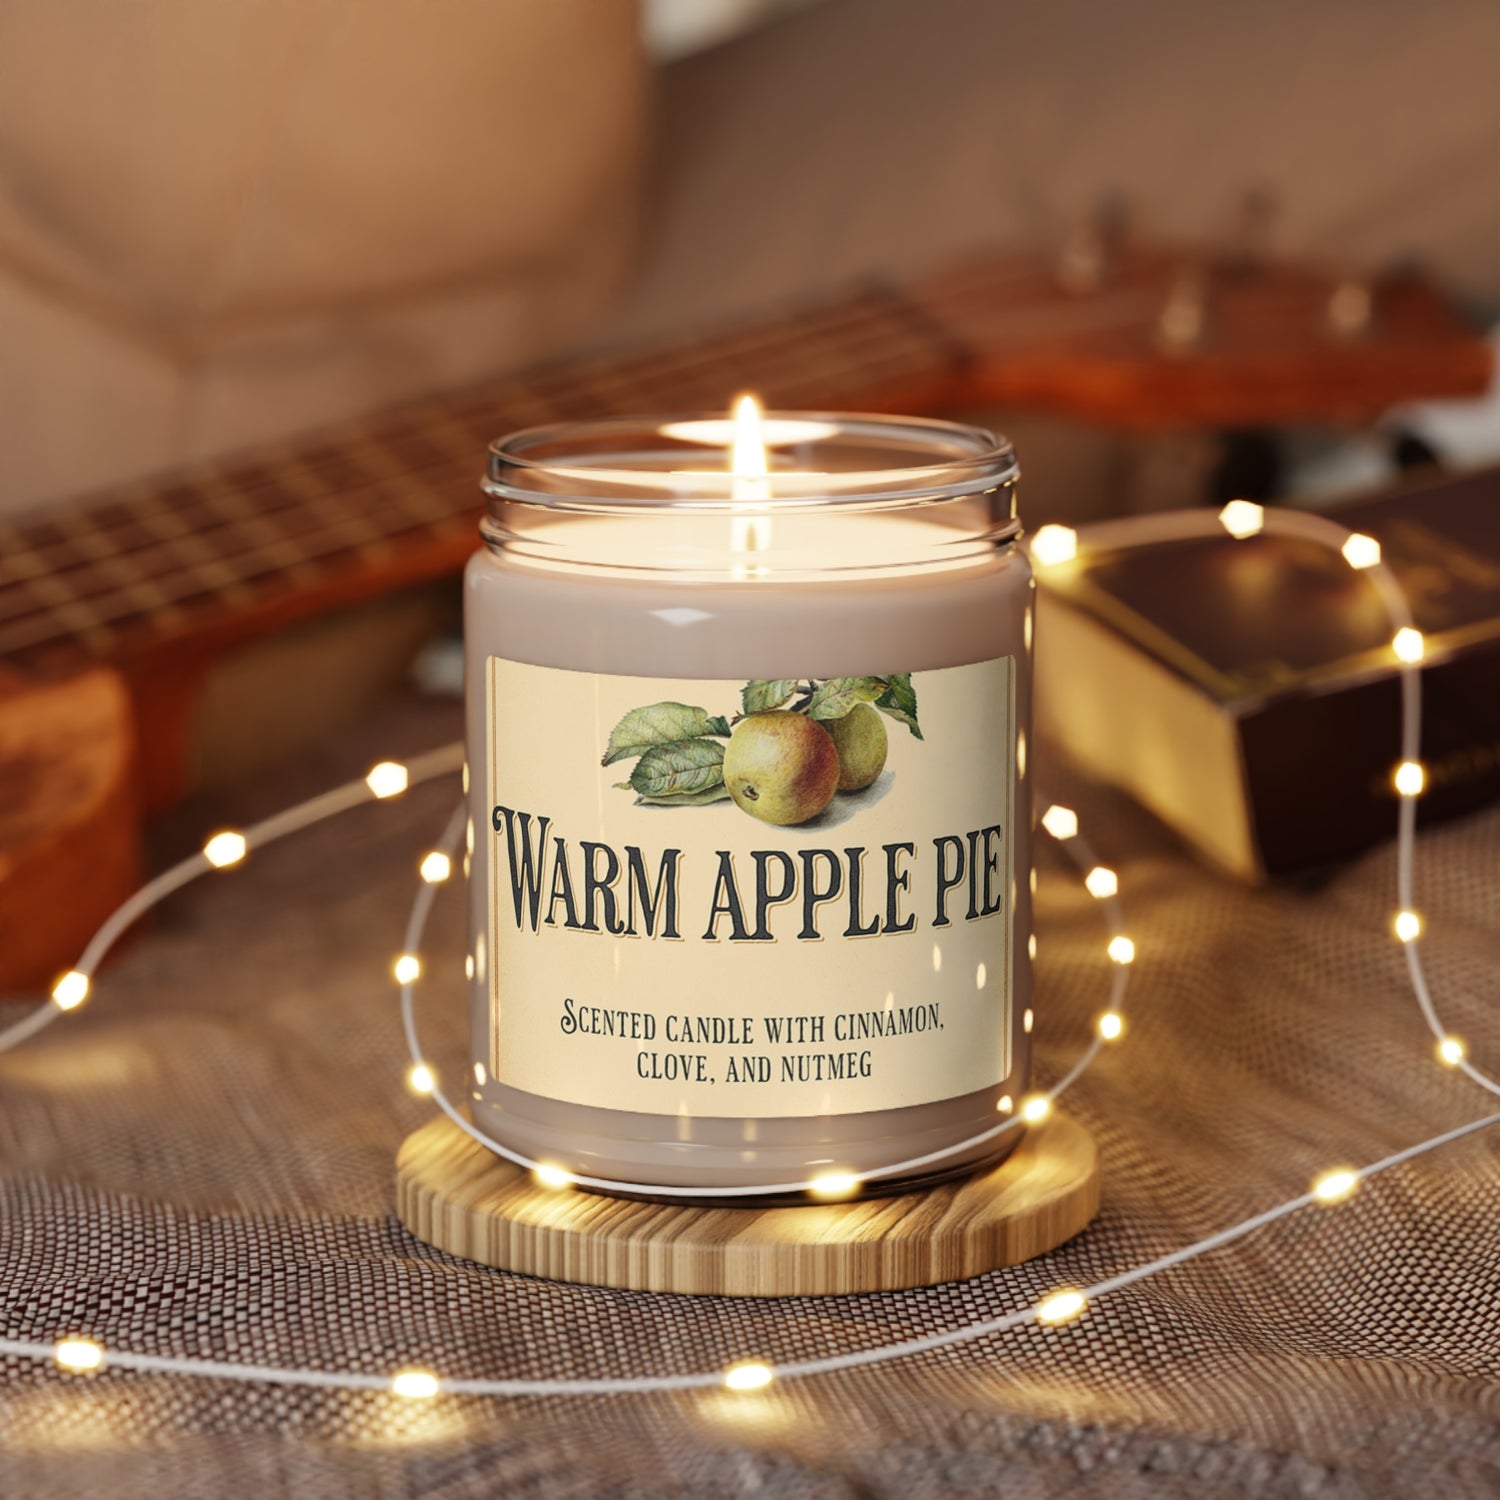 Sweet Apple Pie Scented Soy Candle, 9oz. Burns 50-60 hours. Great holiday, hostess, coworker or family gift a nostalgic scent of old times.